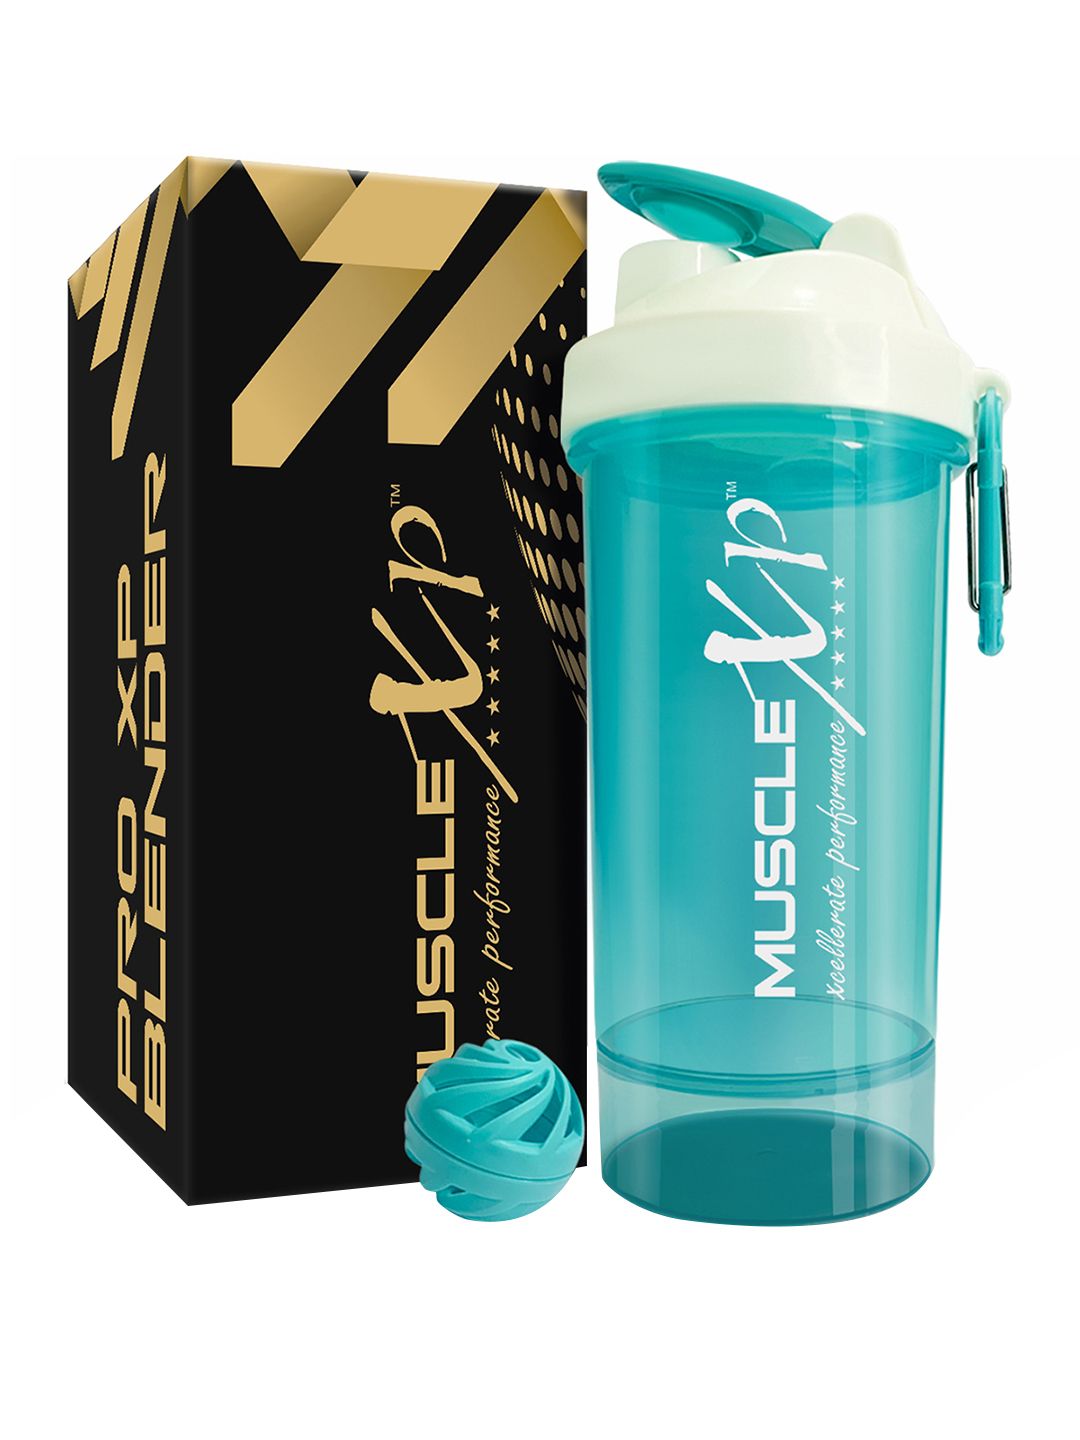 MUSCLEXP Sea Green Leakproof Gym Shaker Price in India